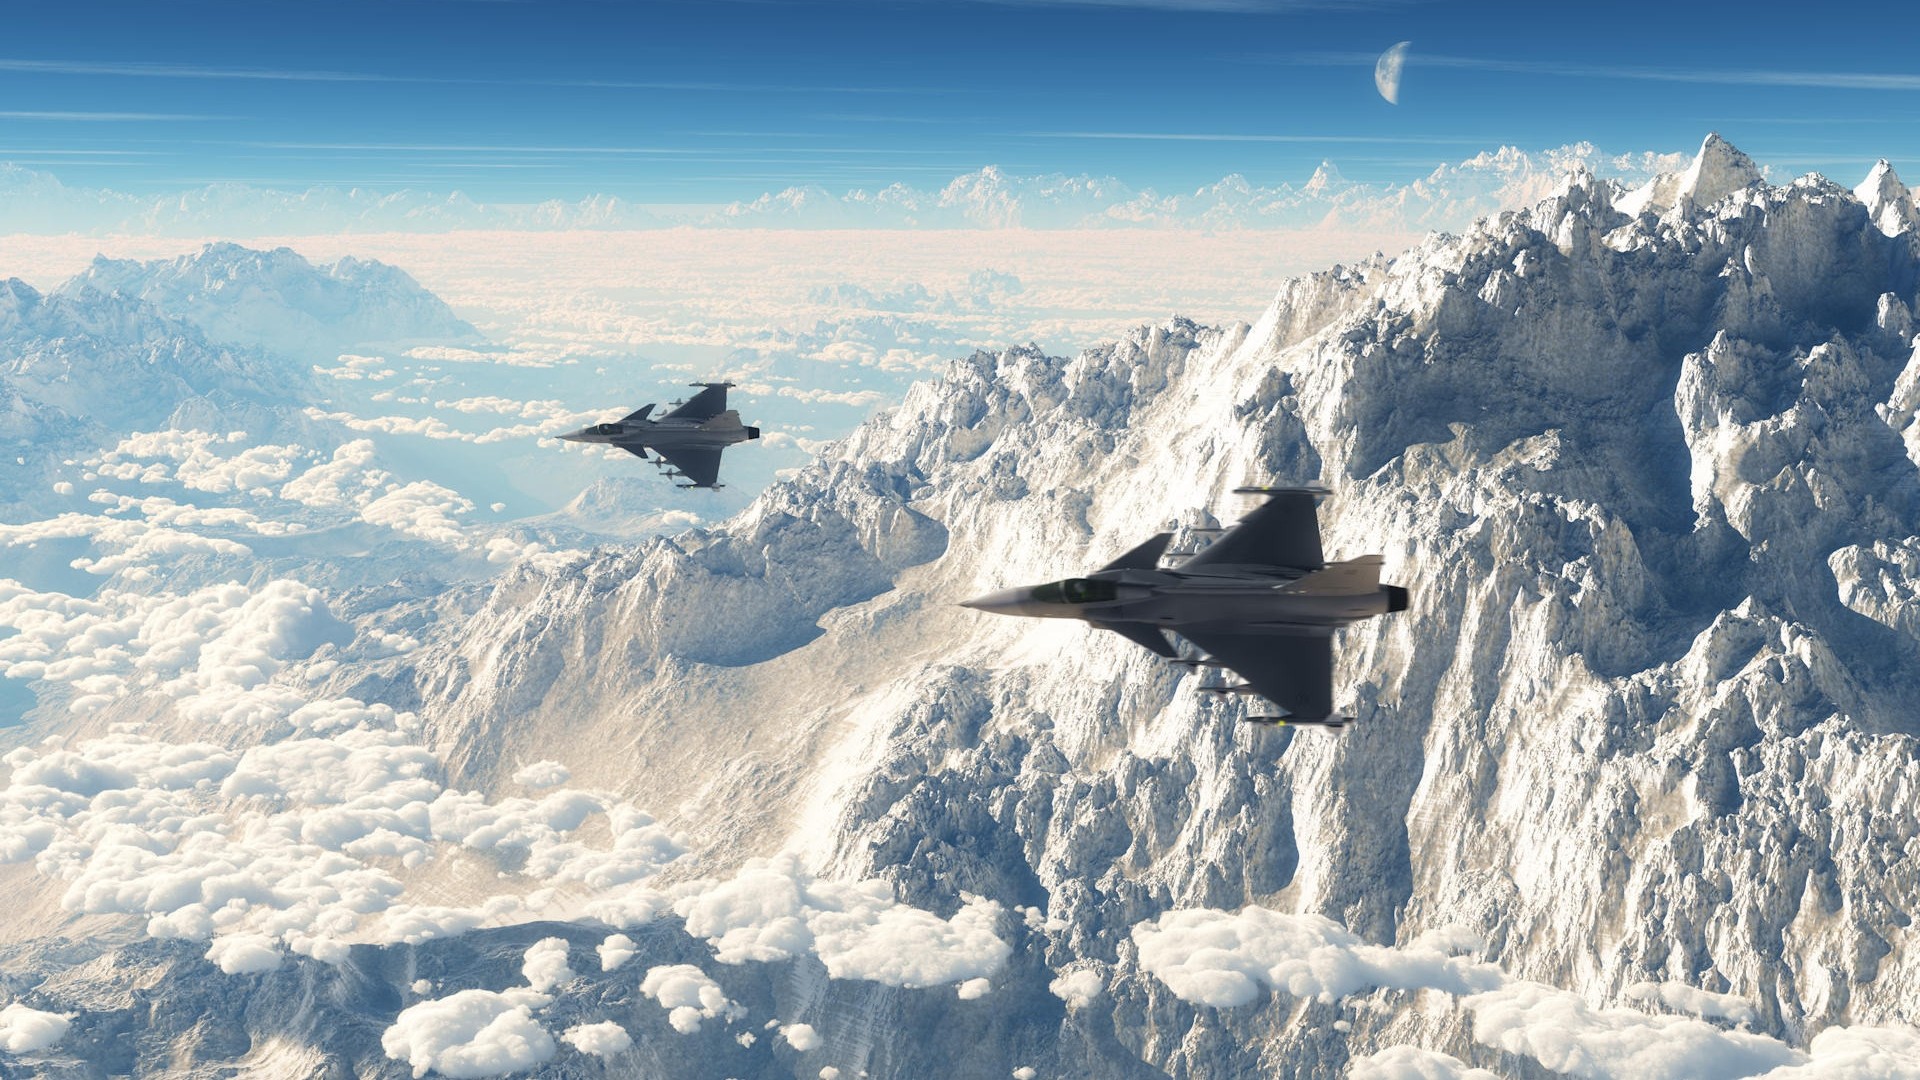 Airplane Aircraft Sky JAS 39 Gripen Military Aircraft Military Vehicle 1920x1080